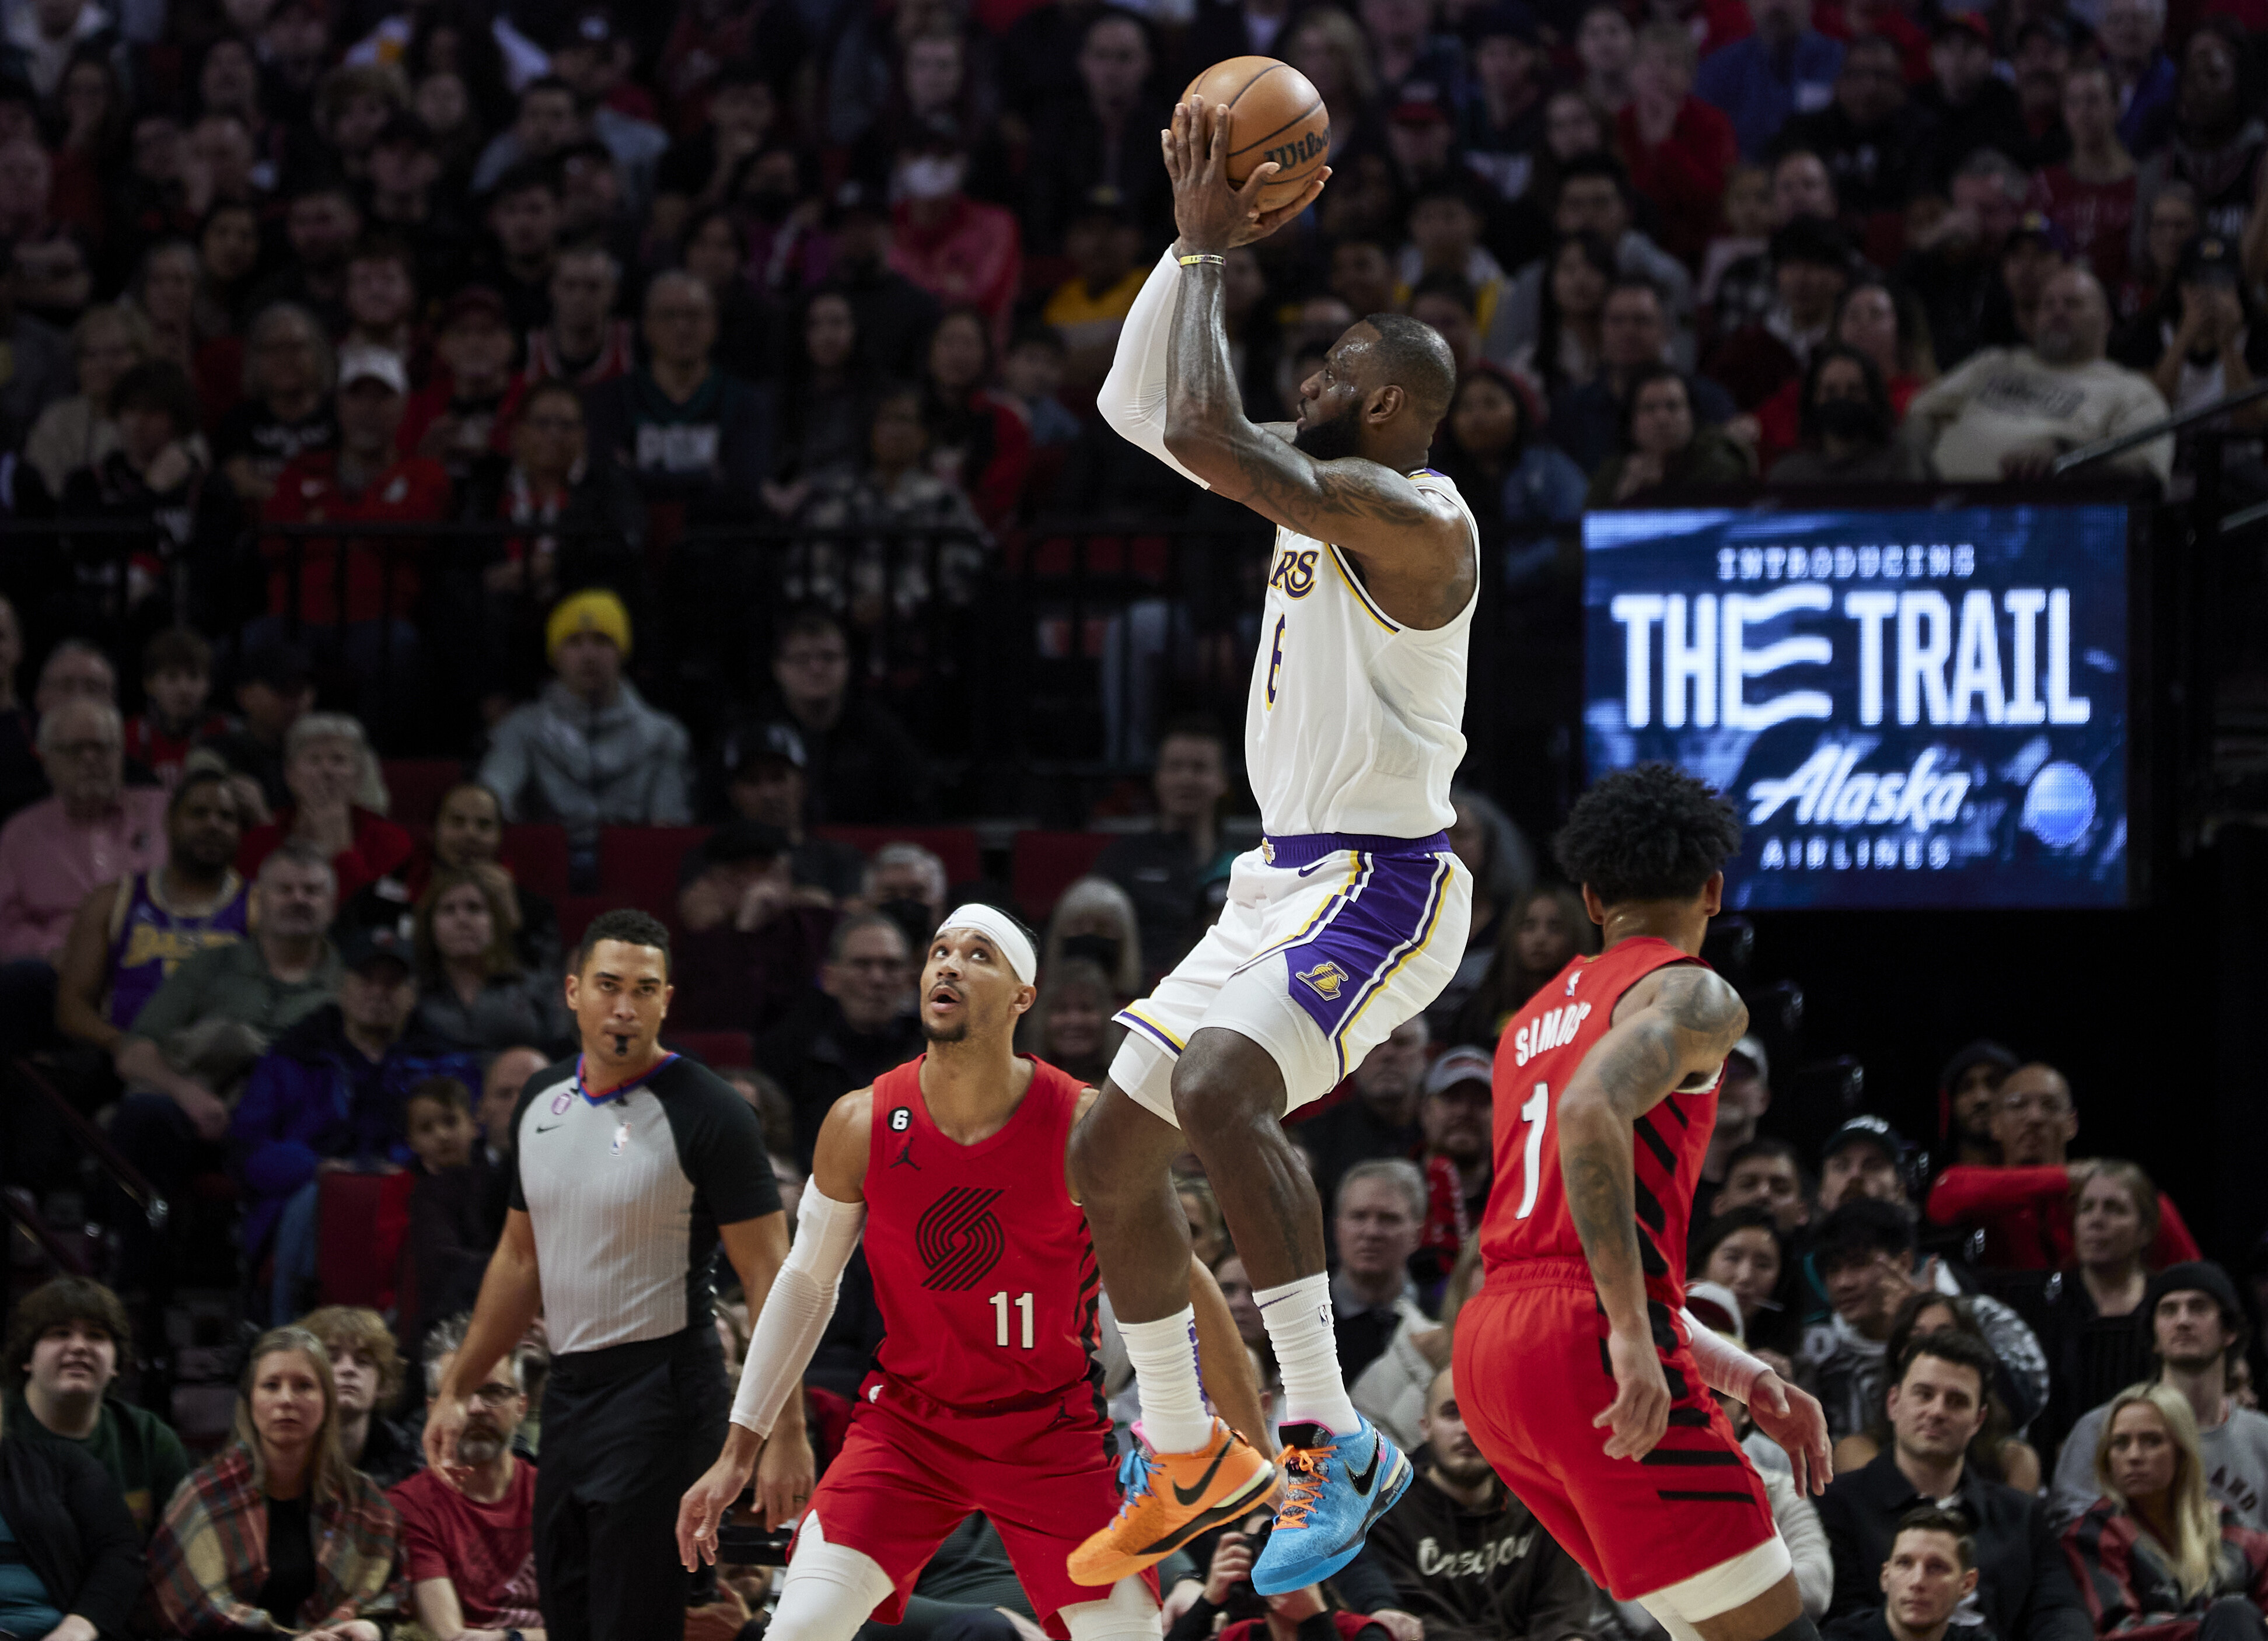 Los Angeles Lakers forward LeBron James jumps in to score on a long-distance goal as Portland Trail Blazers Josh Hart and Infernee Simmons watch in a game Sunday, Jan. 22, 2023. (AP Photo/Craig Mitchelldyer)